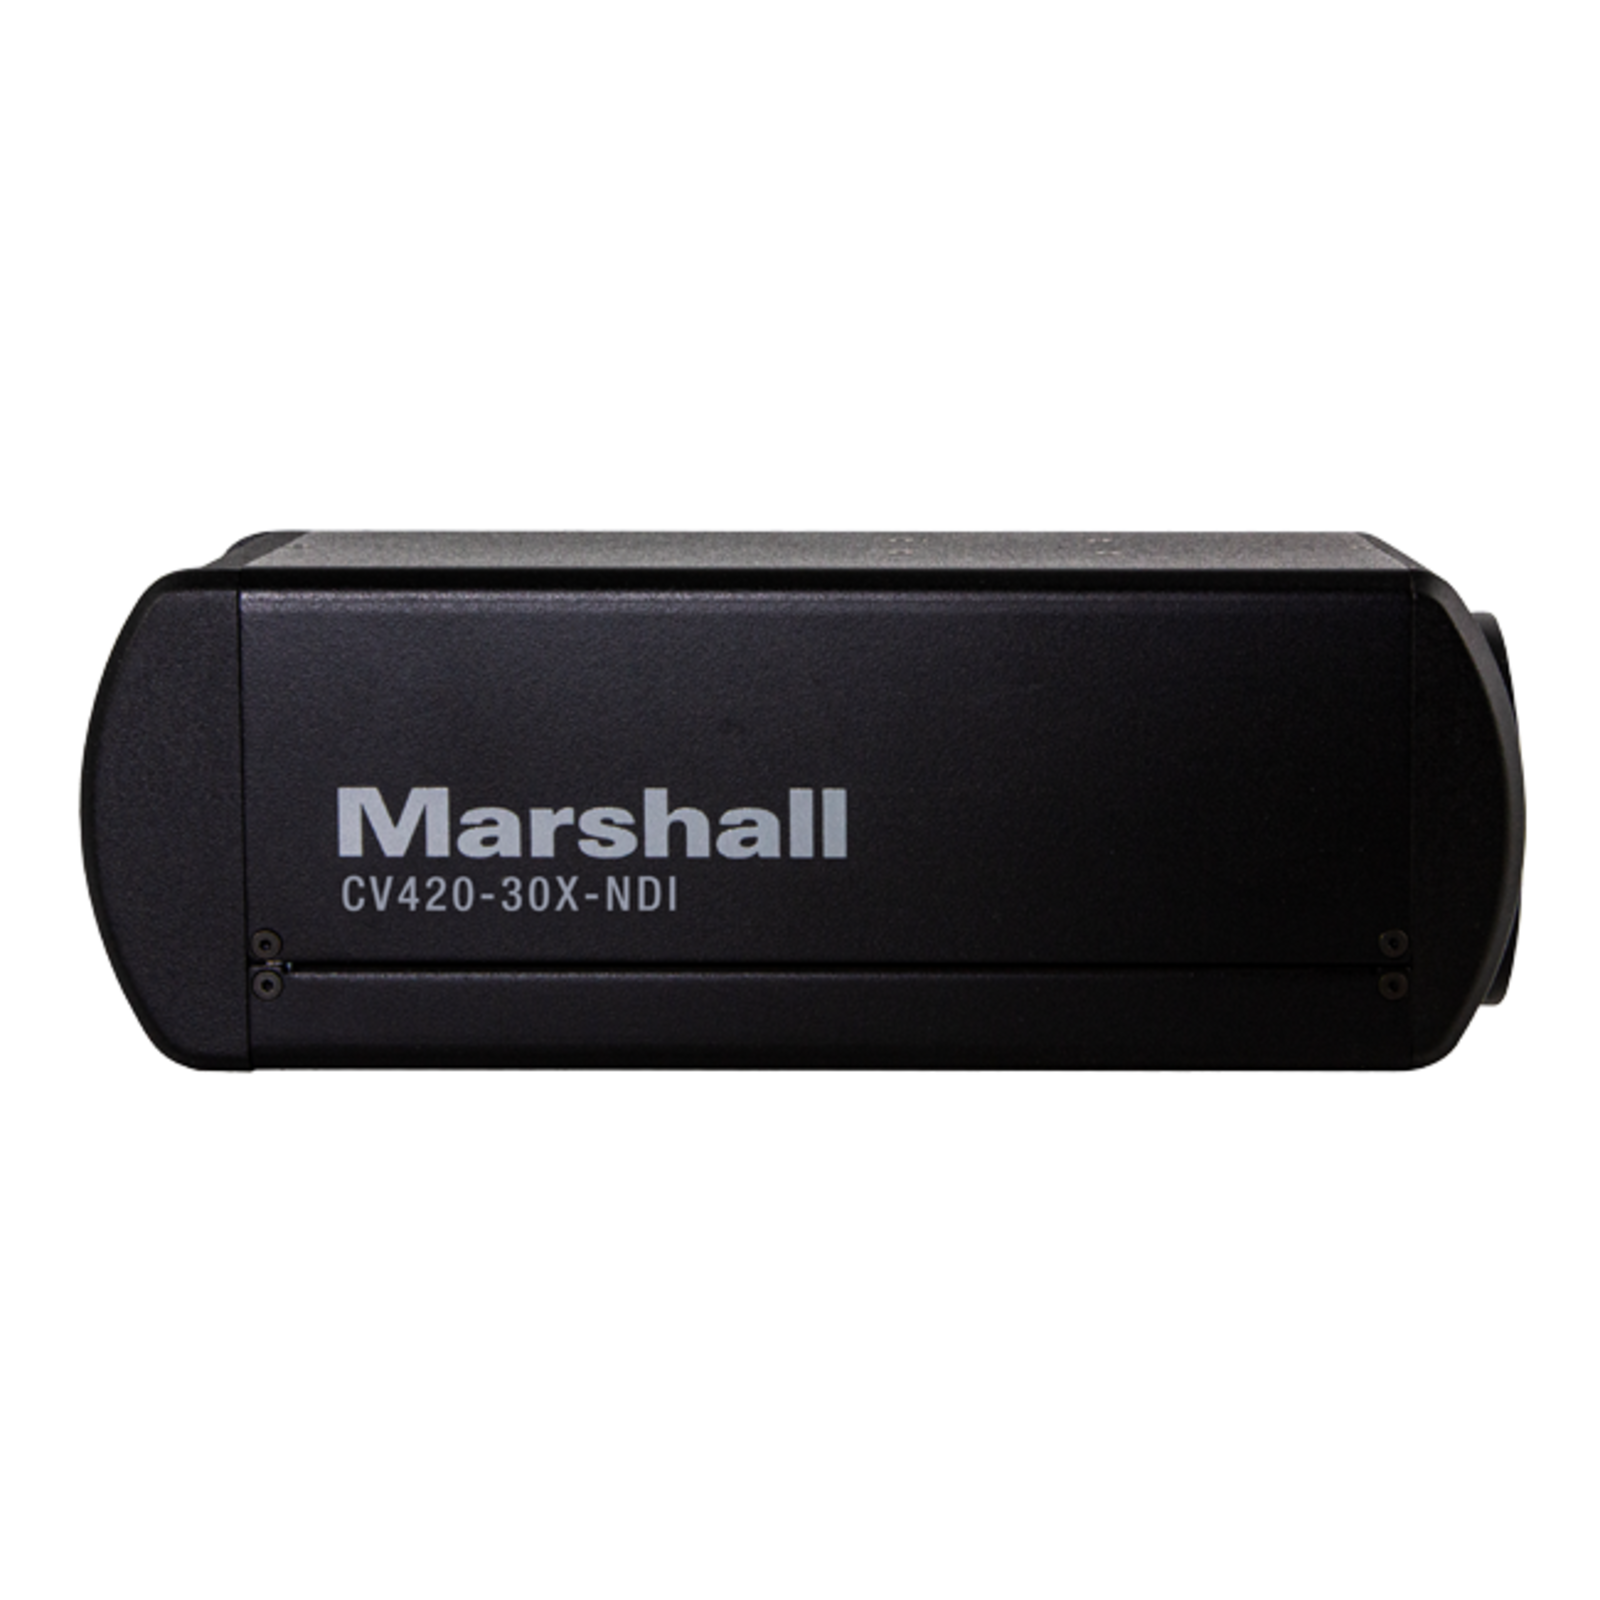 Marshall 4K (UHD) Zoom Block Camera with 4.6mm-135mm 30x Zoom Lens – HDMI, IP Ethernet & NDI Outputs